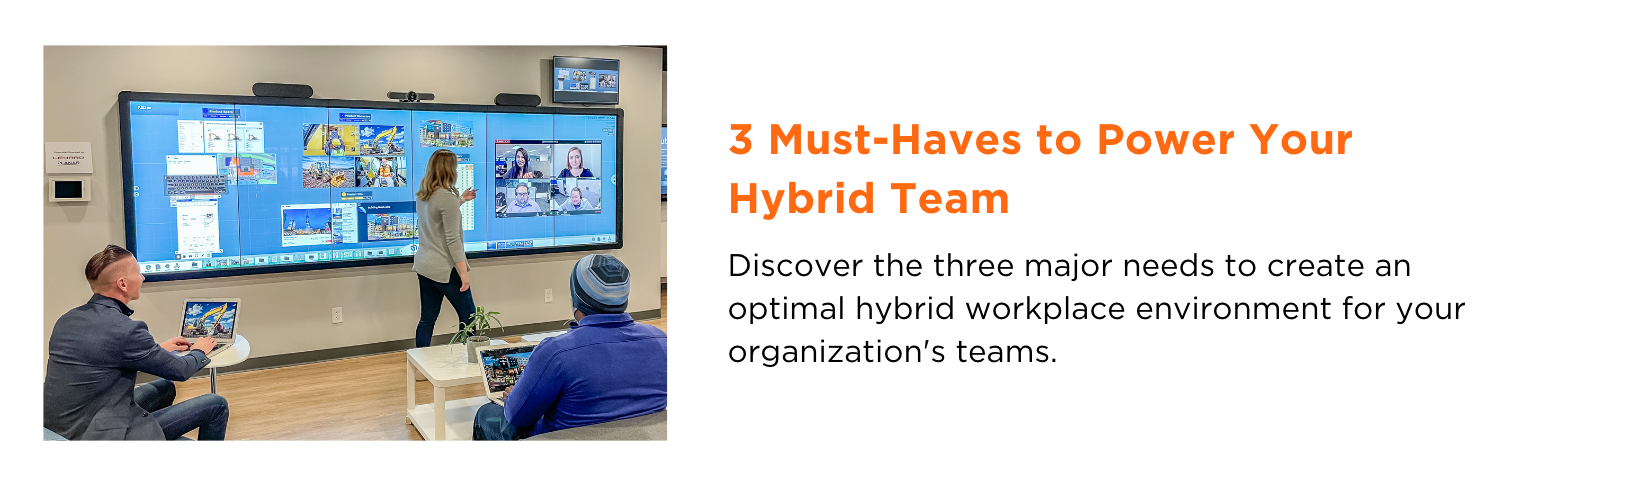 t1v-3-must-haves-to-power-your-hybrid-team-blog-image